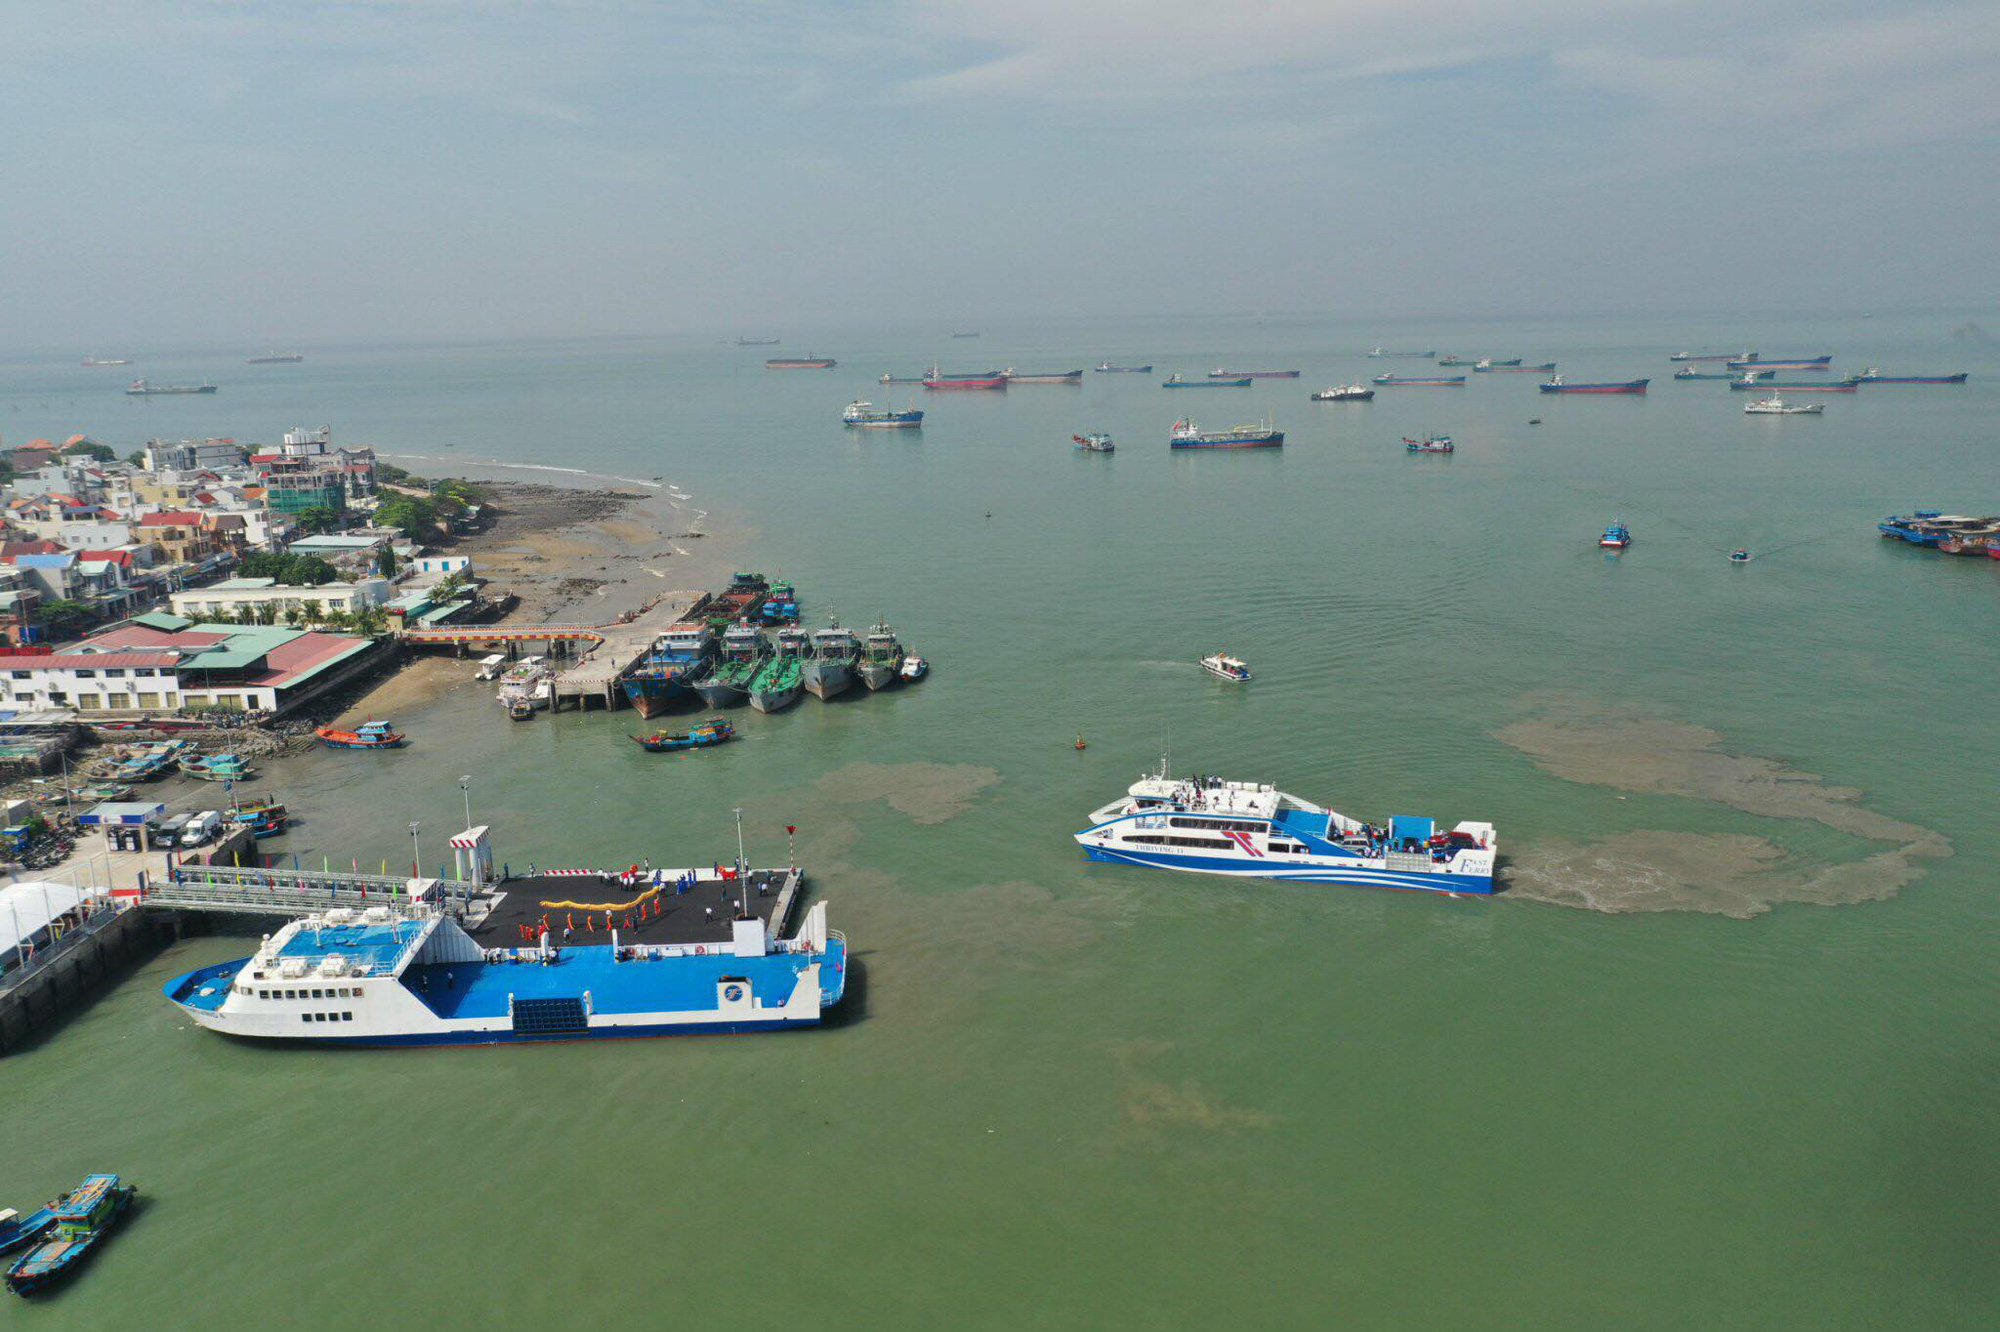 Can Gio-Vung Tau ferry service welcomes first passengers in southern Vietnam